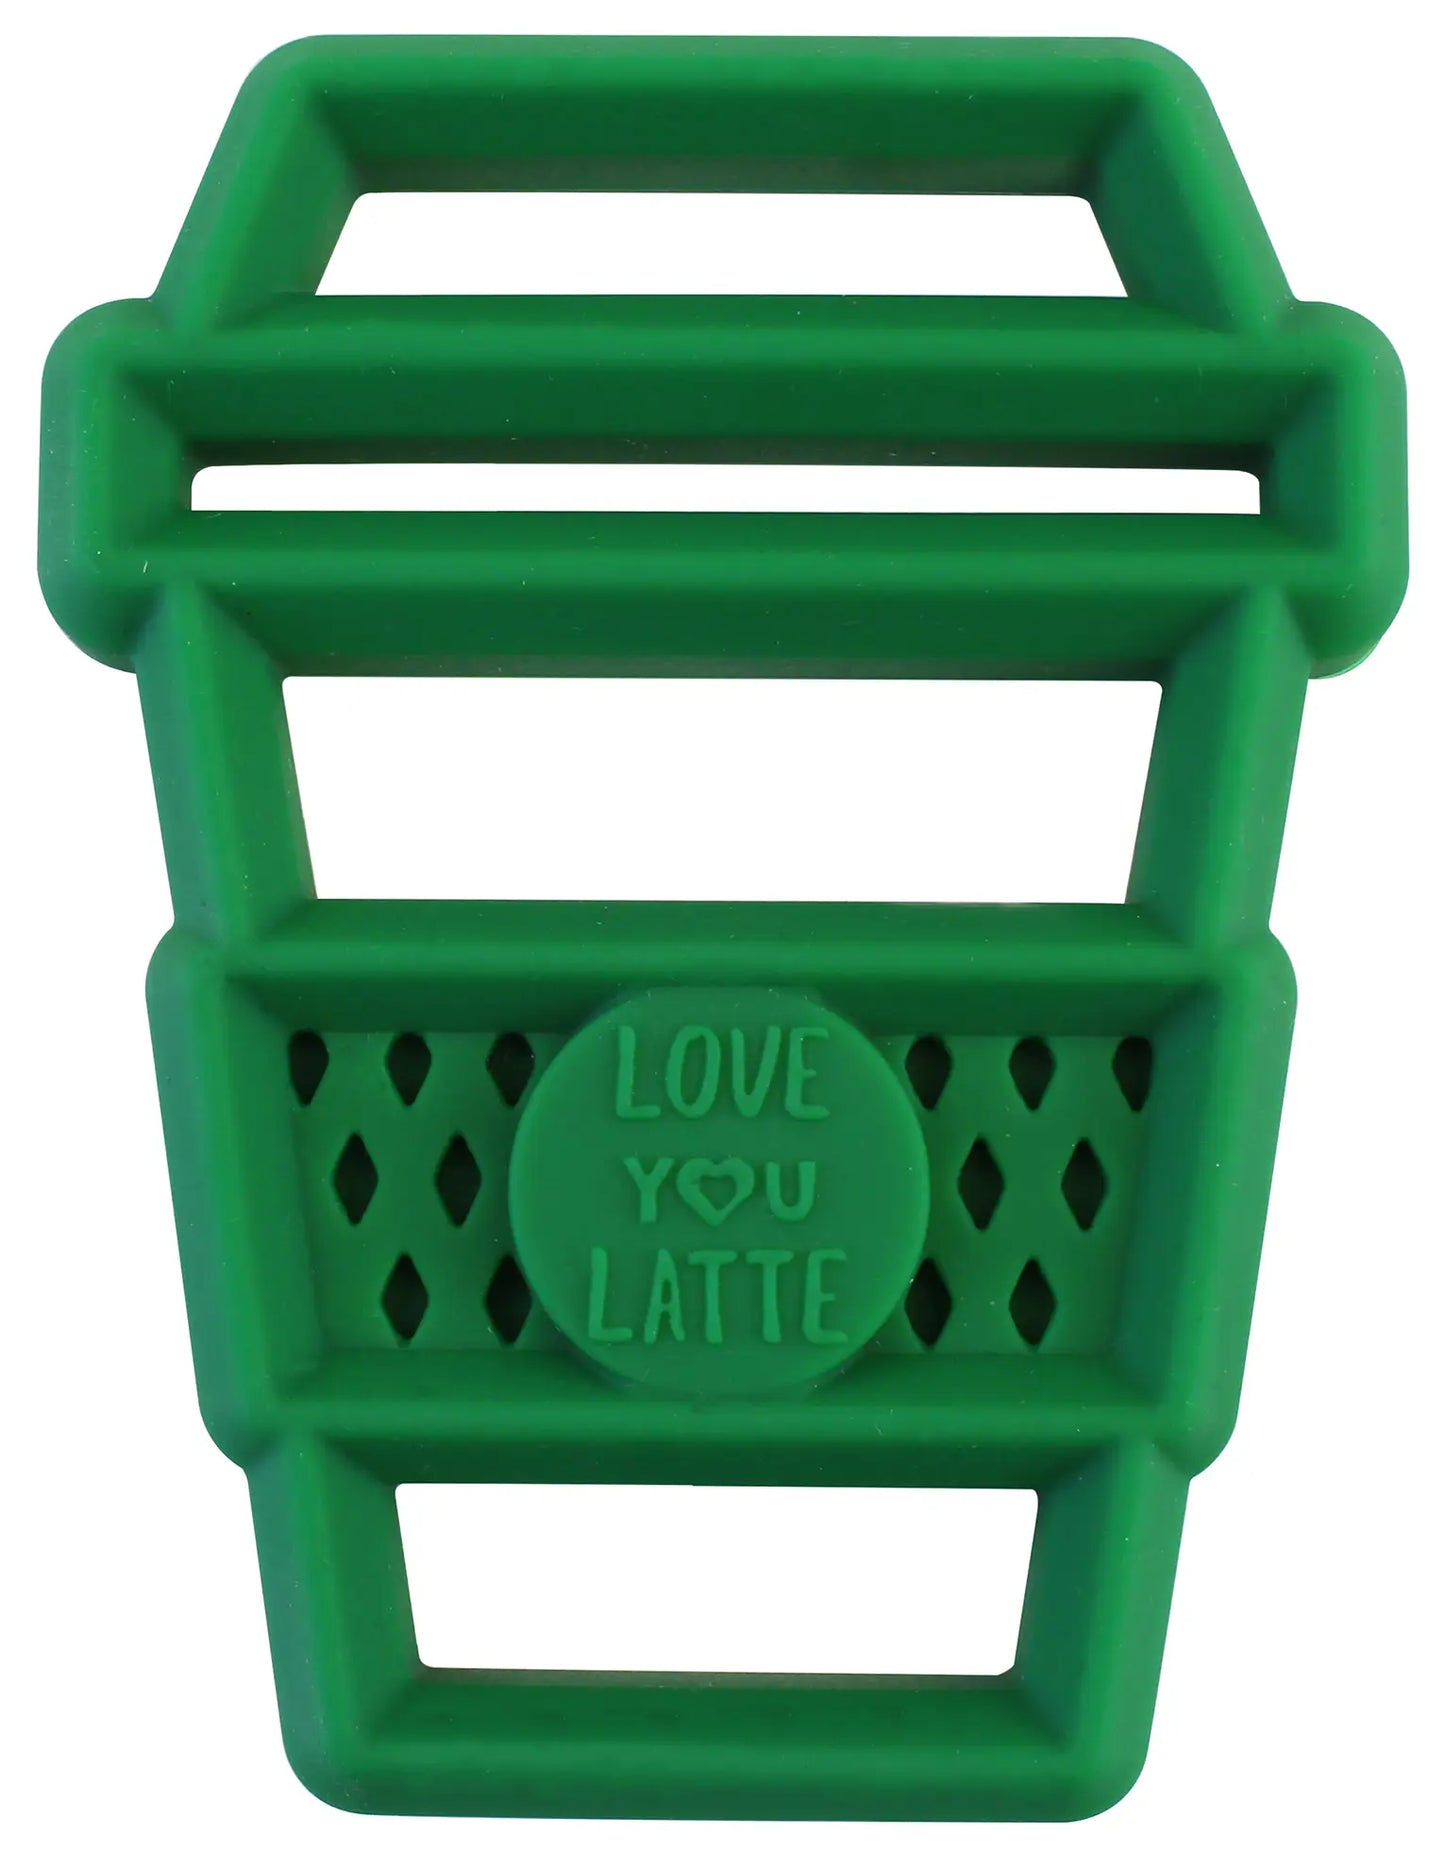 Chew Crew Silicone Baby Teether - Latte